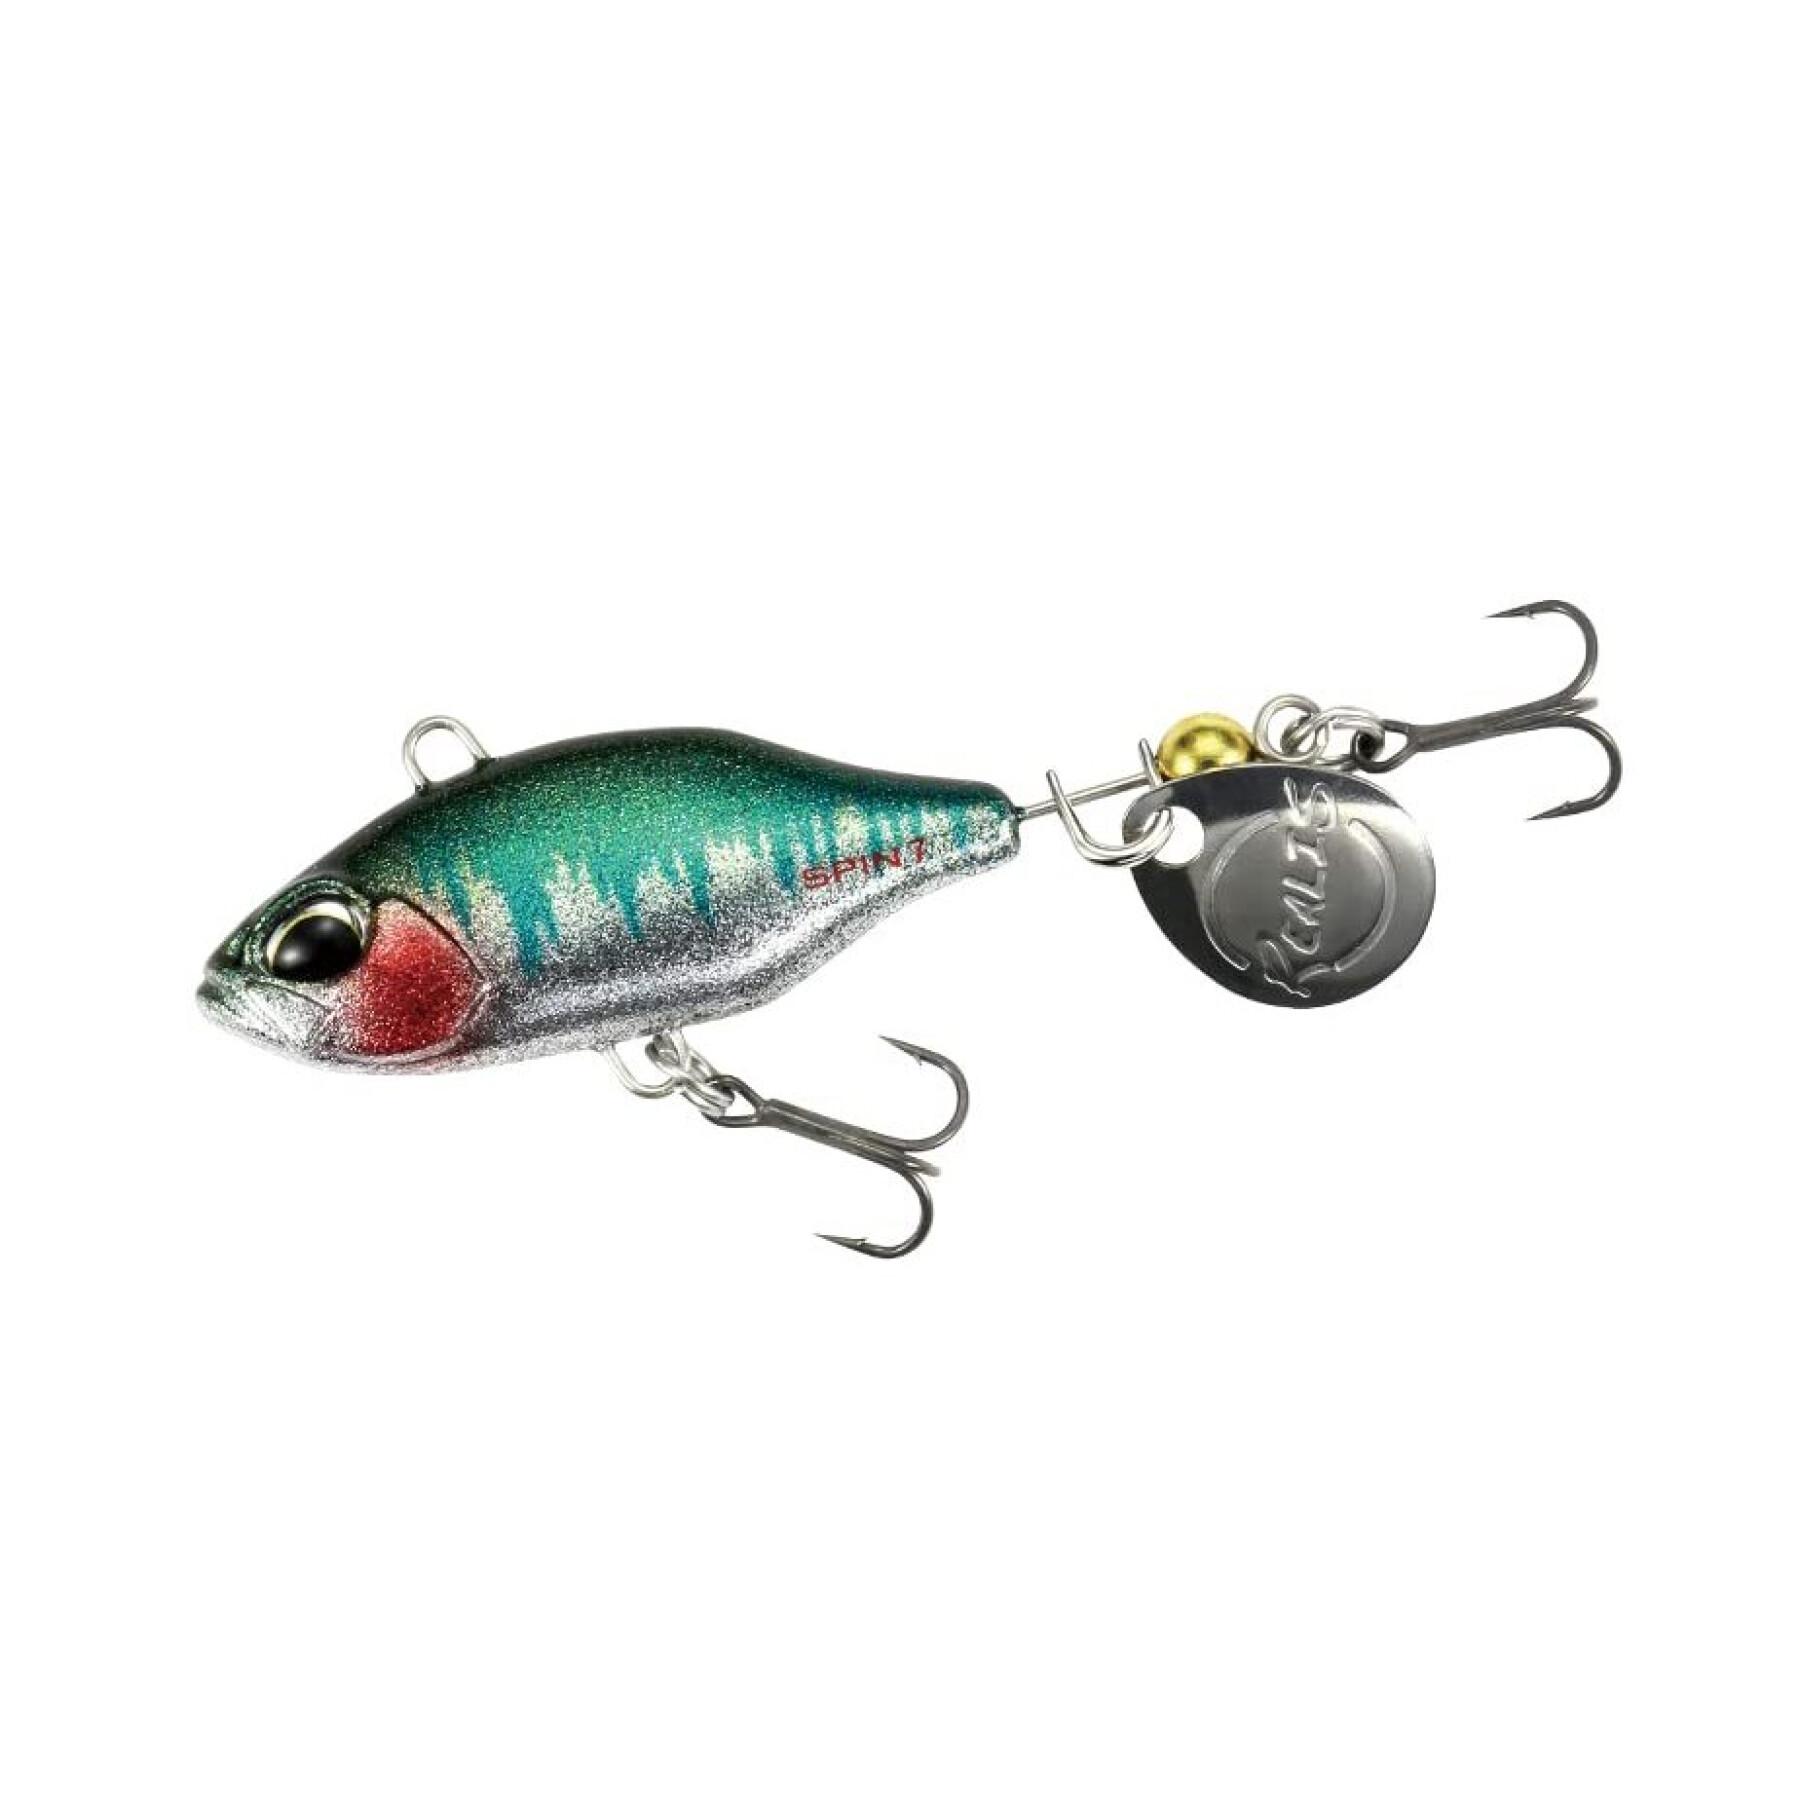 Realis spin duo kunstaas - 7g